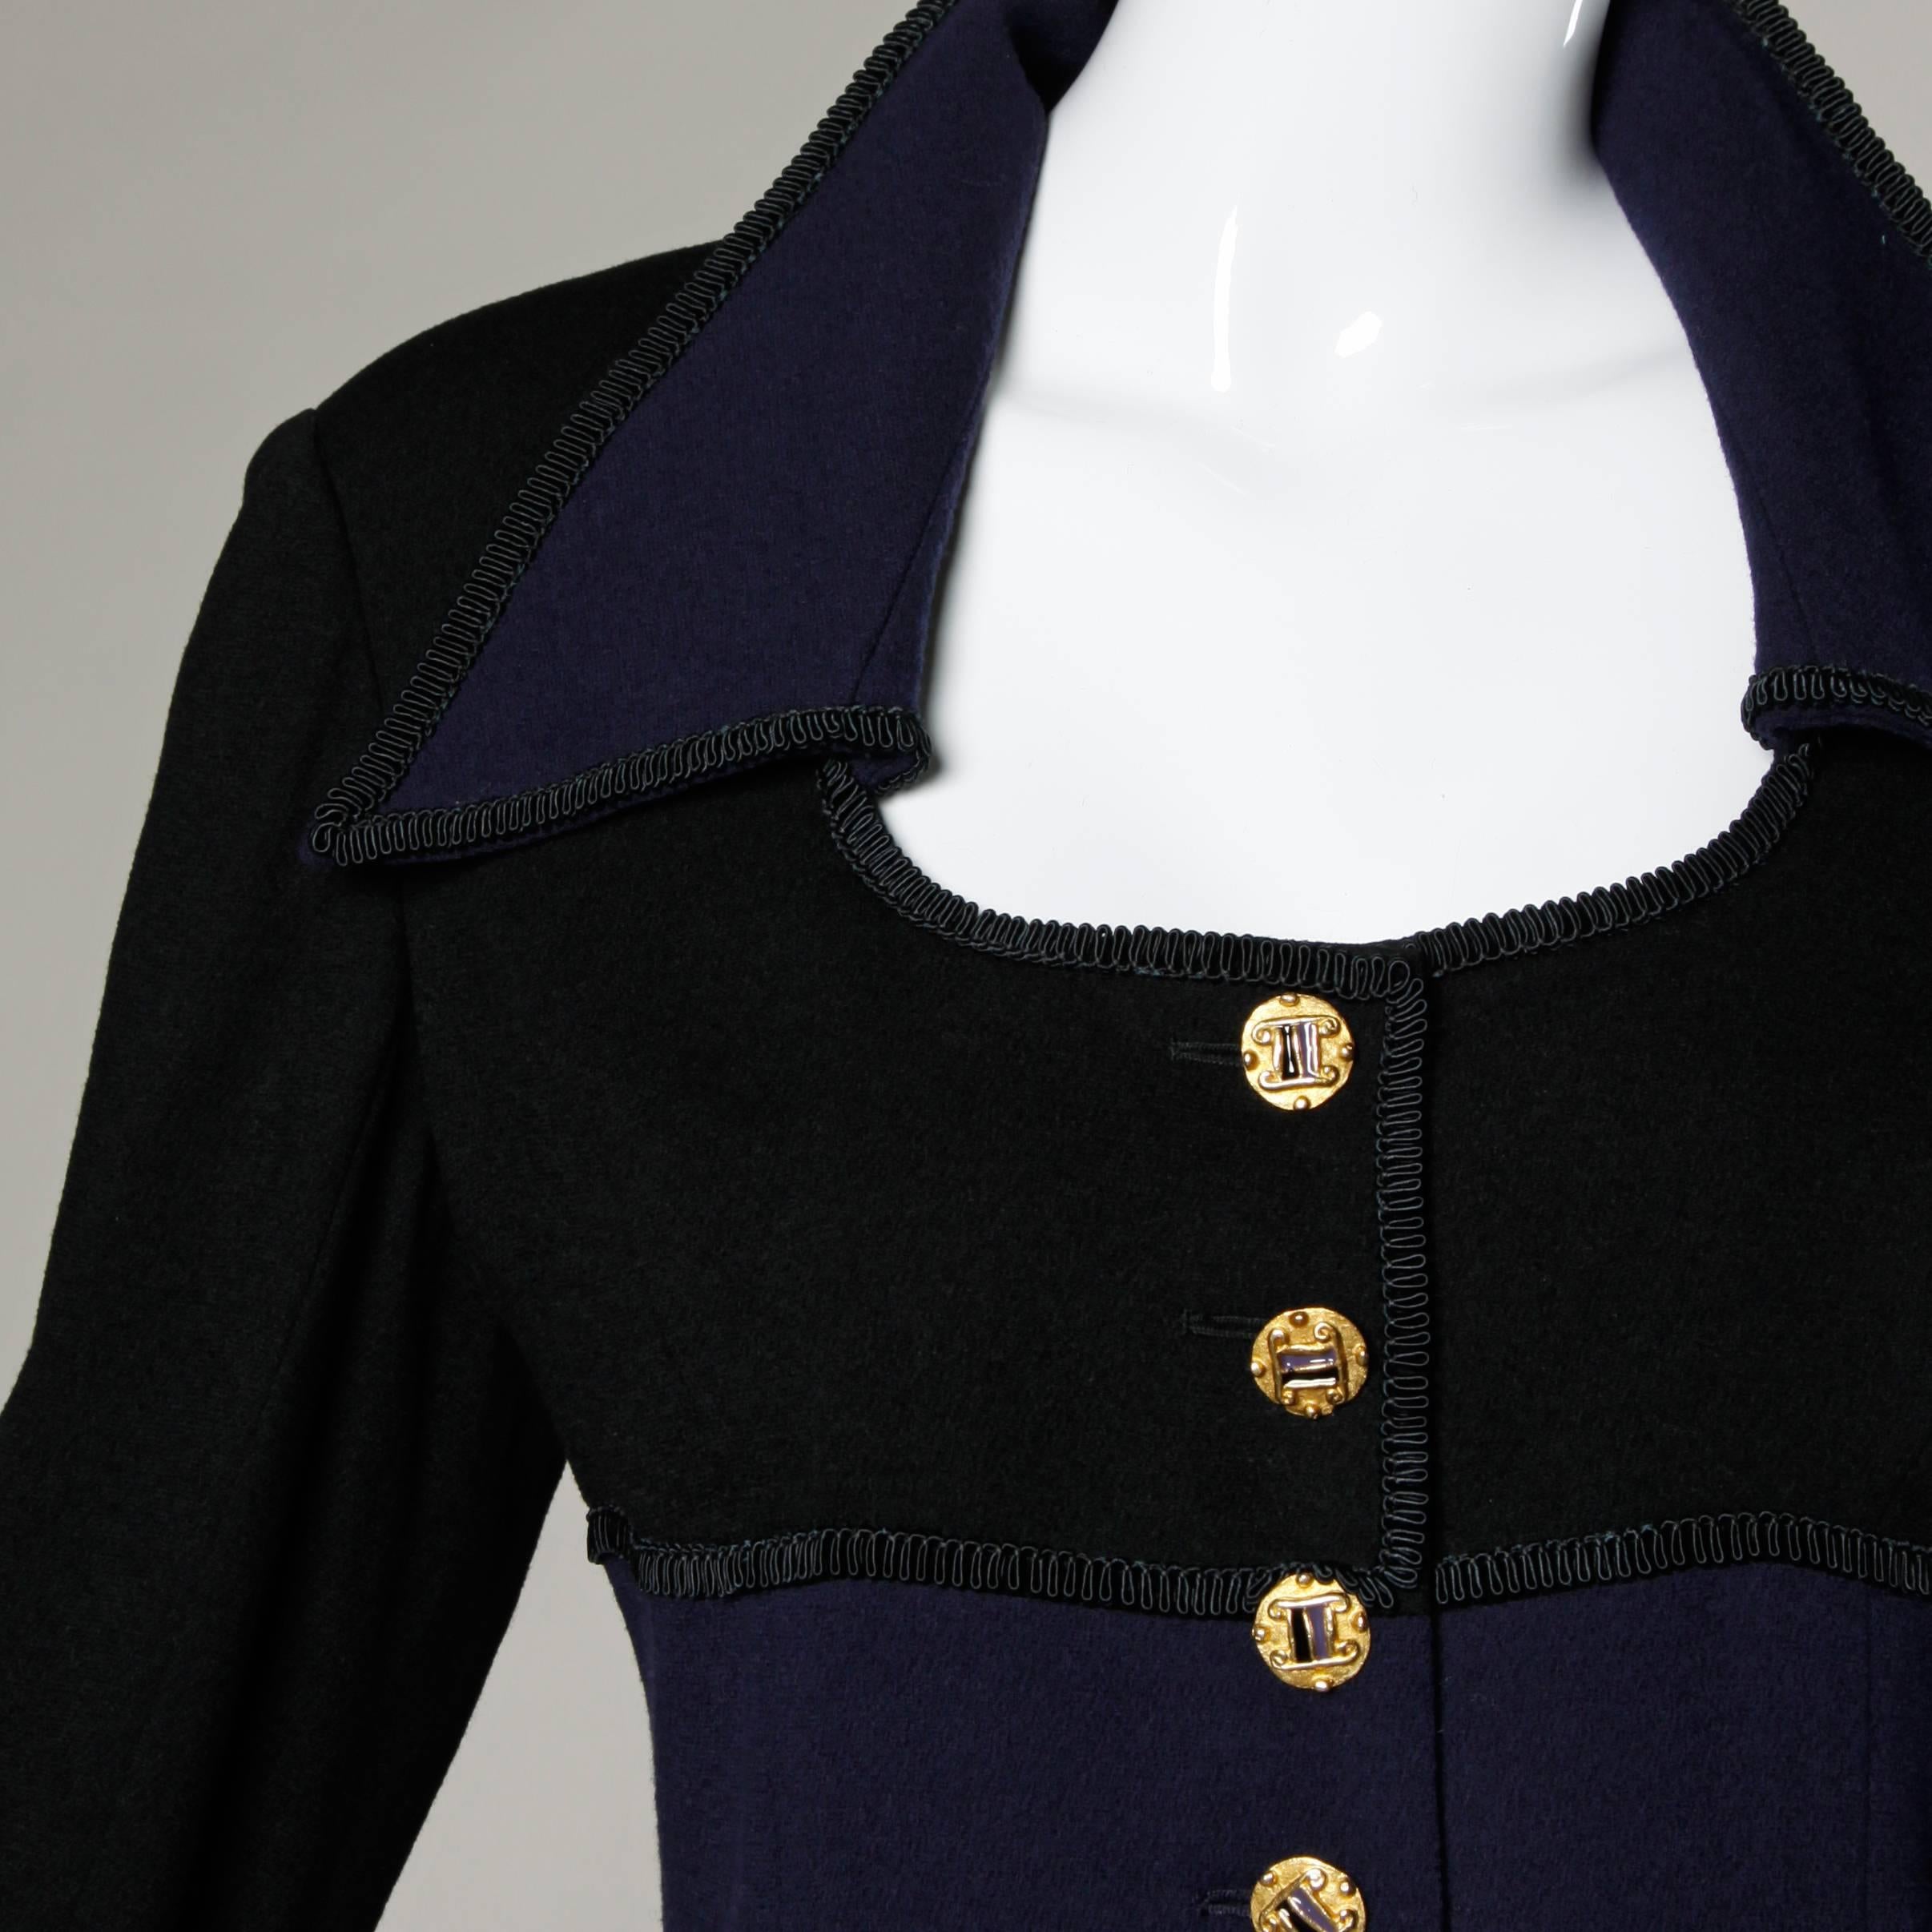 Vintage Louis Feraud coat dress in dark purple and black wool. Unique cut and military-style buttons.

Details:

Fully Lined
Shoulder Pads Are Sewn Into Lining
Front Button and Wrist Button Closure
Marked Size: 12
Estimated Size: